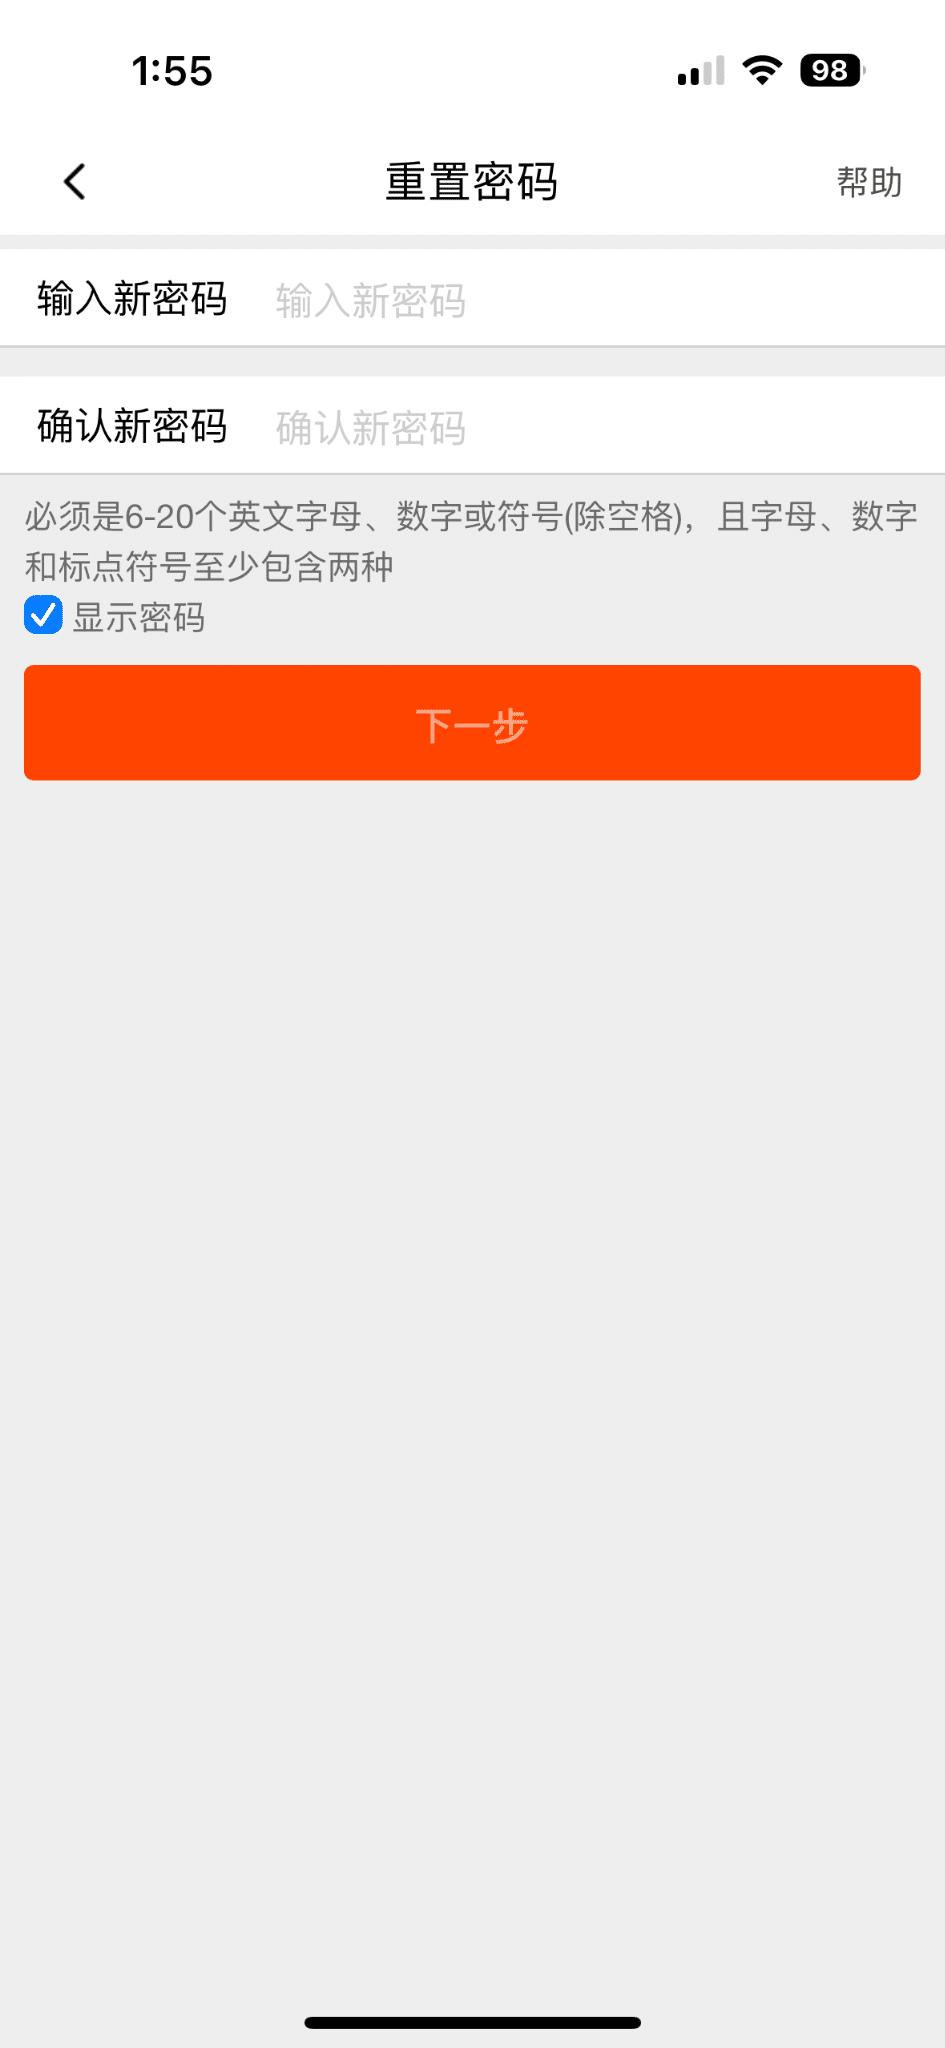 Use the forgot password feature on mobile to fix the Taobao login problem, can’t log in or sign in, or verification not sending, receiving, or working